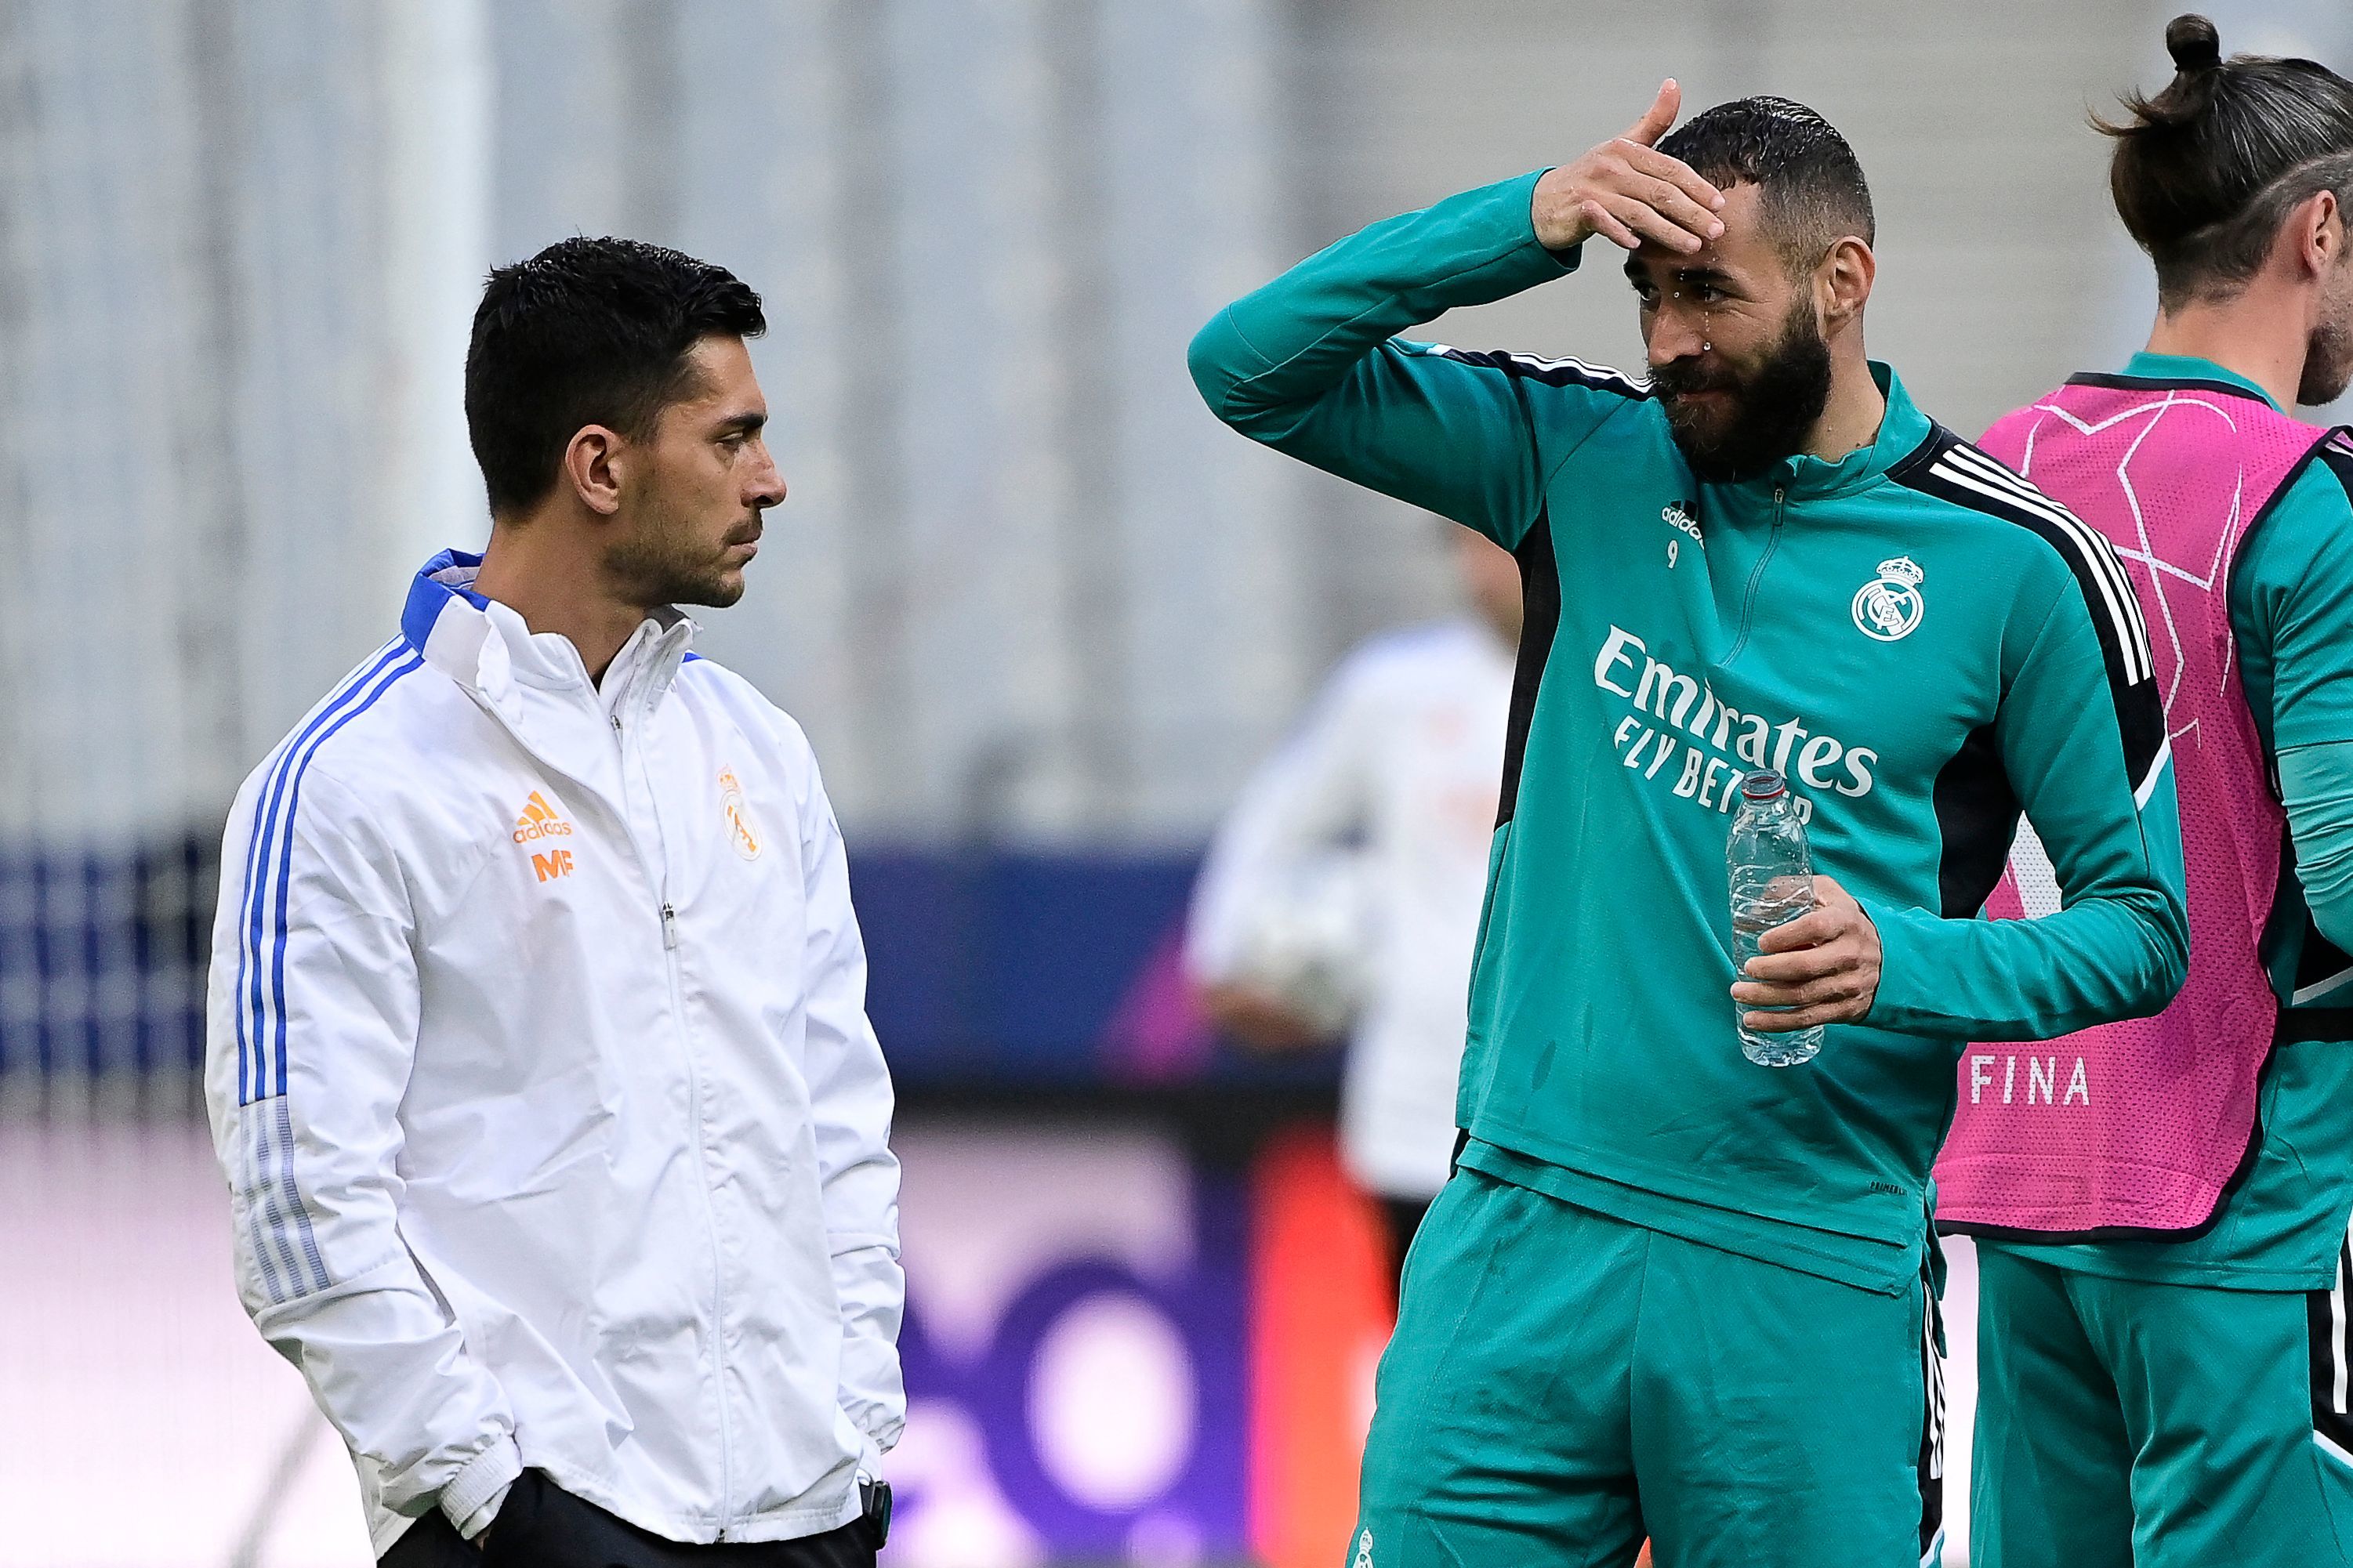 Real Madrid's French forward Karim  lt;HIT gt;Benzema lt;/HIT gt; (C) reacts during a training session at the Stade de France in Saint-Denis on May 27, 2022, on the eve of their UEFA Champions League final football match against Liverpool FC. (Photo by JAVIER SORIANO / AFP)